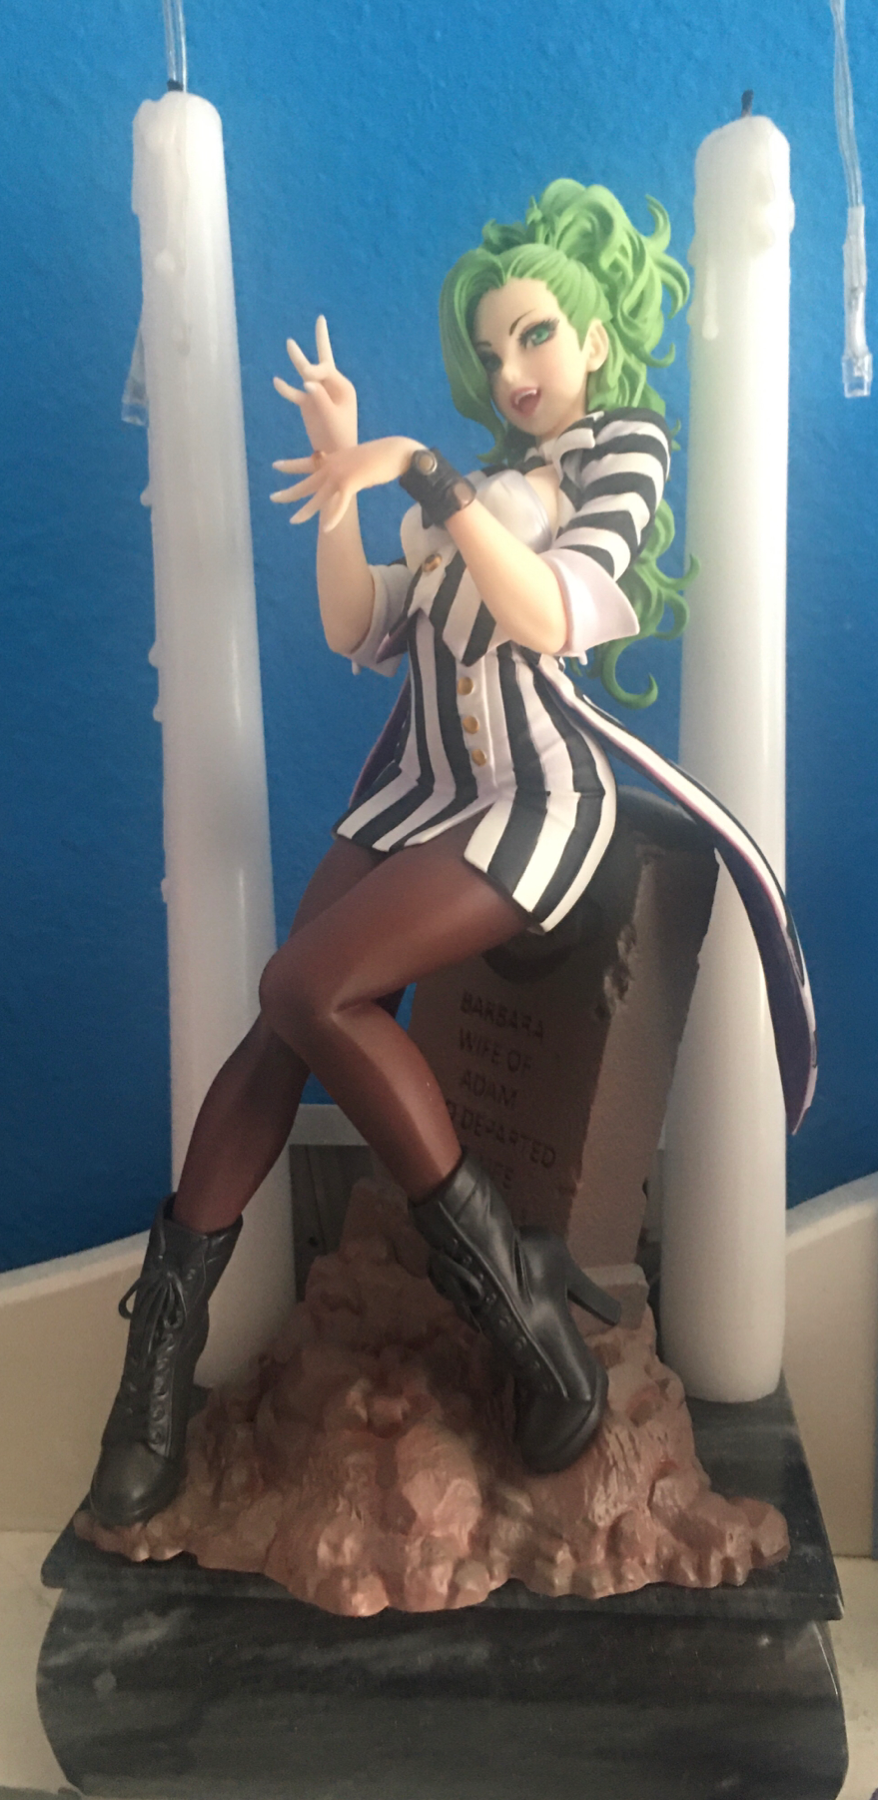 Bababababa look at her
More figures I got in the remixes 